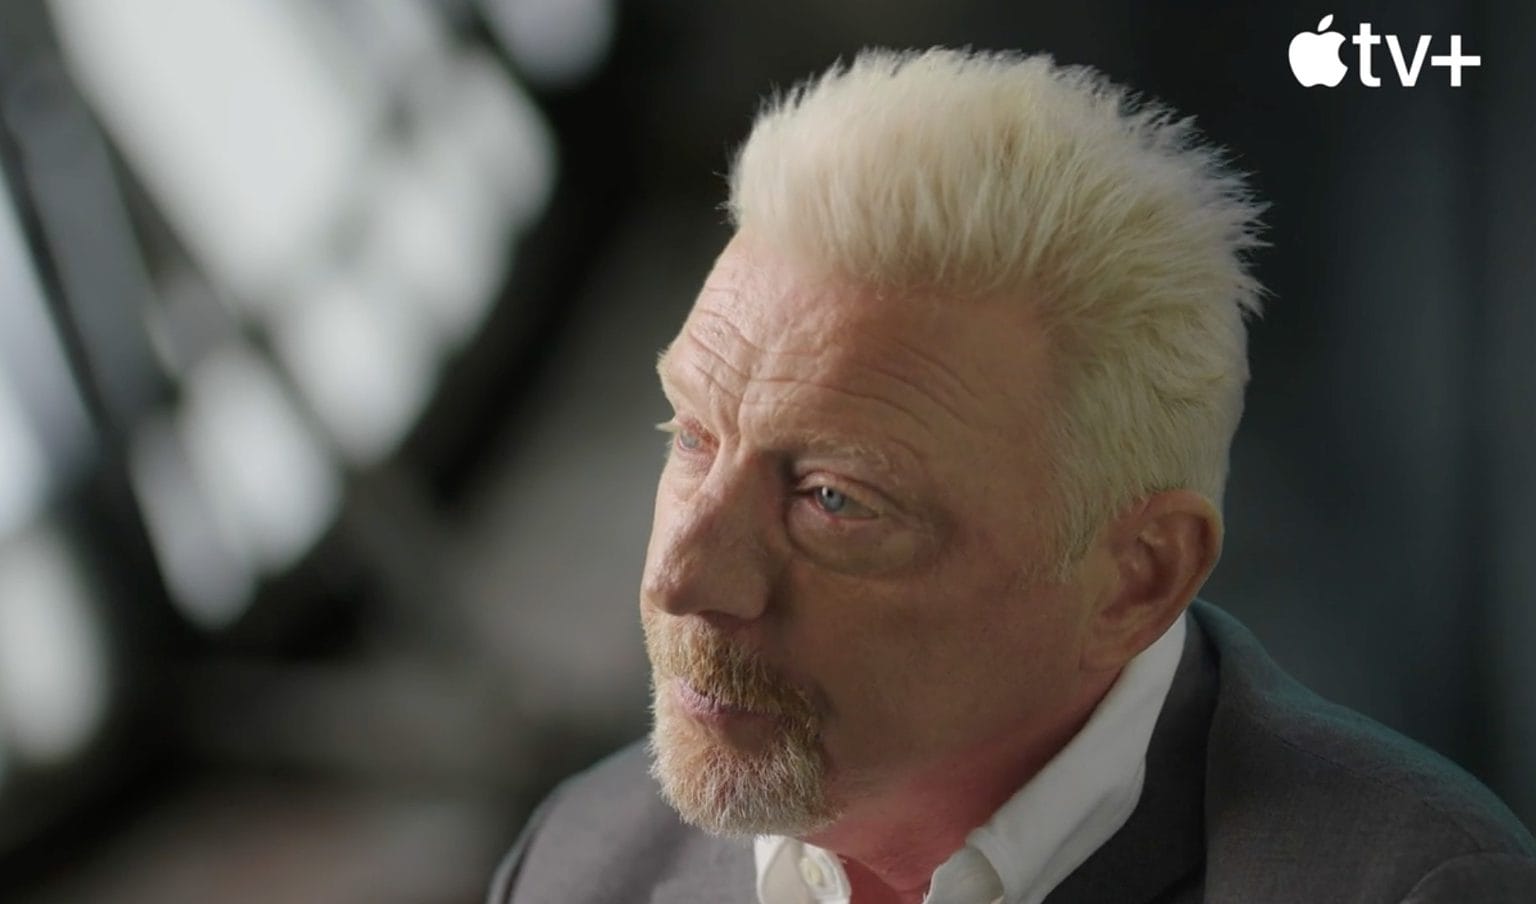 The trailer for the upcoming documentary features a frank interview with tennis legend Boris Becker.